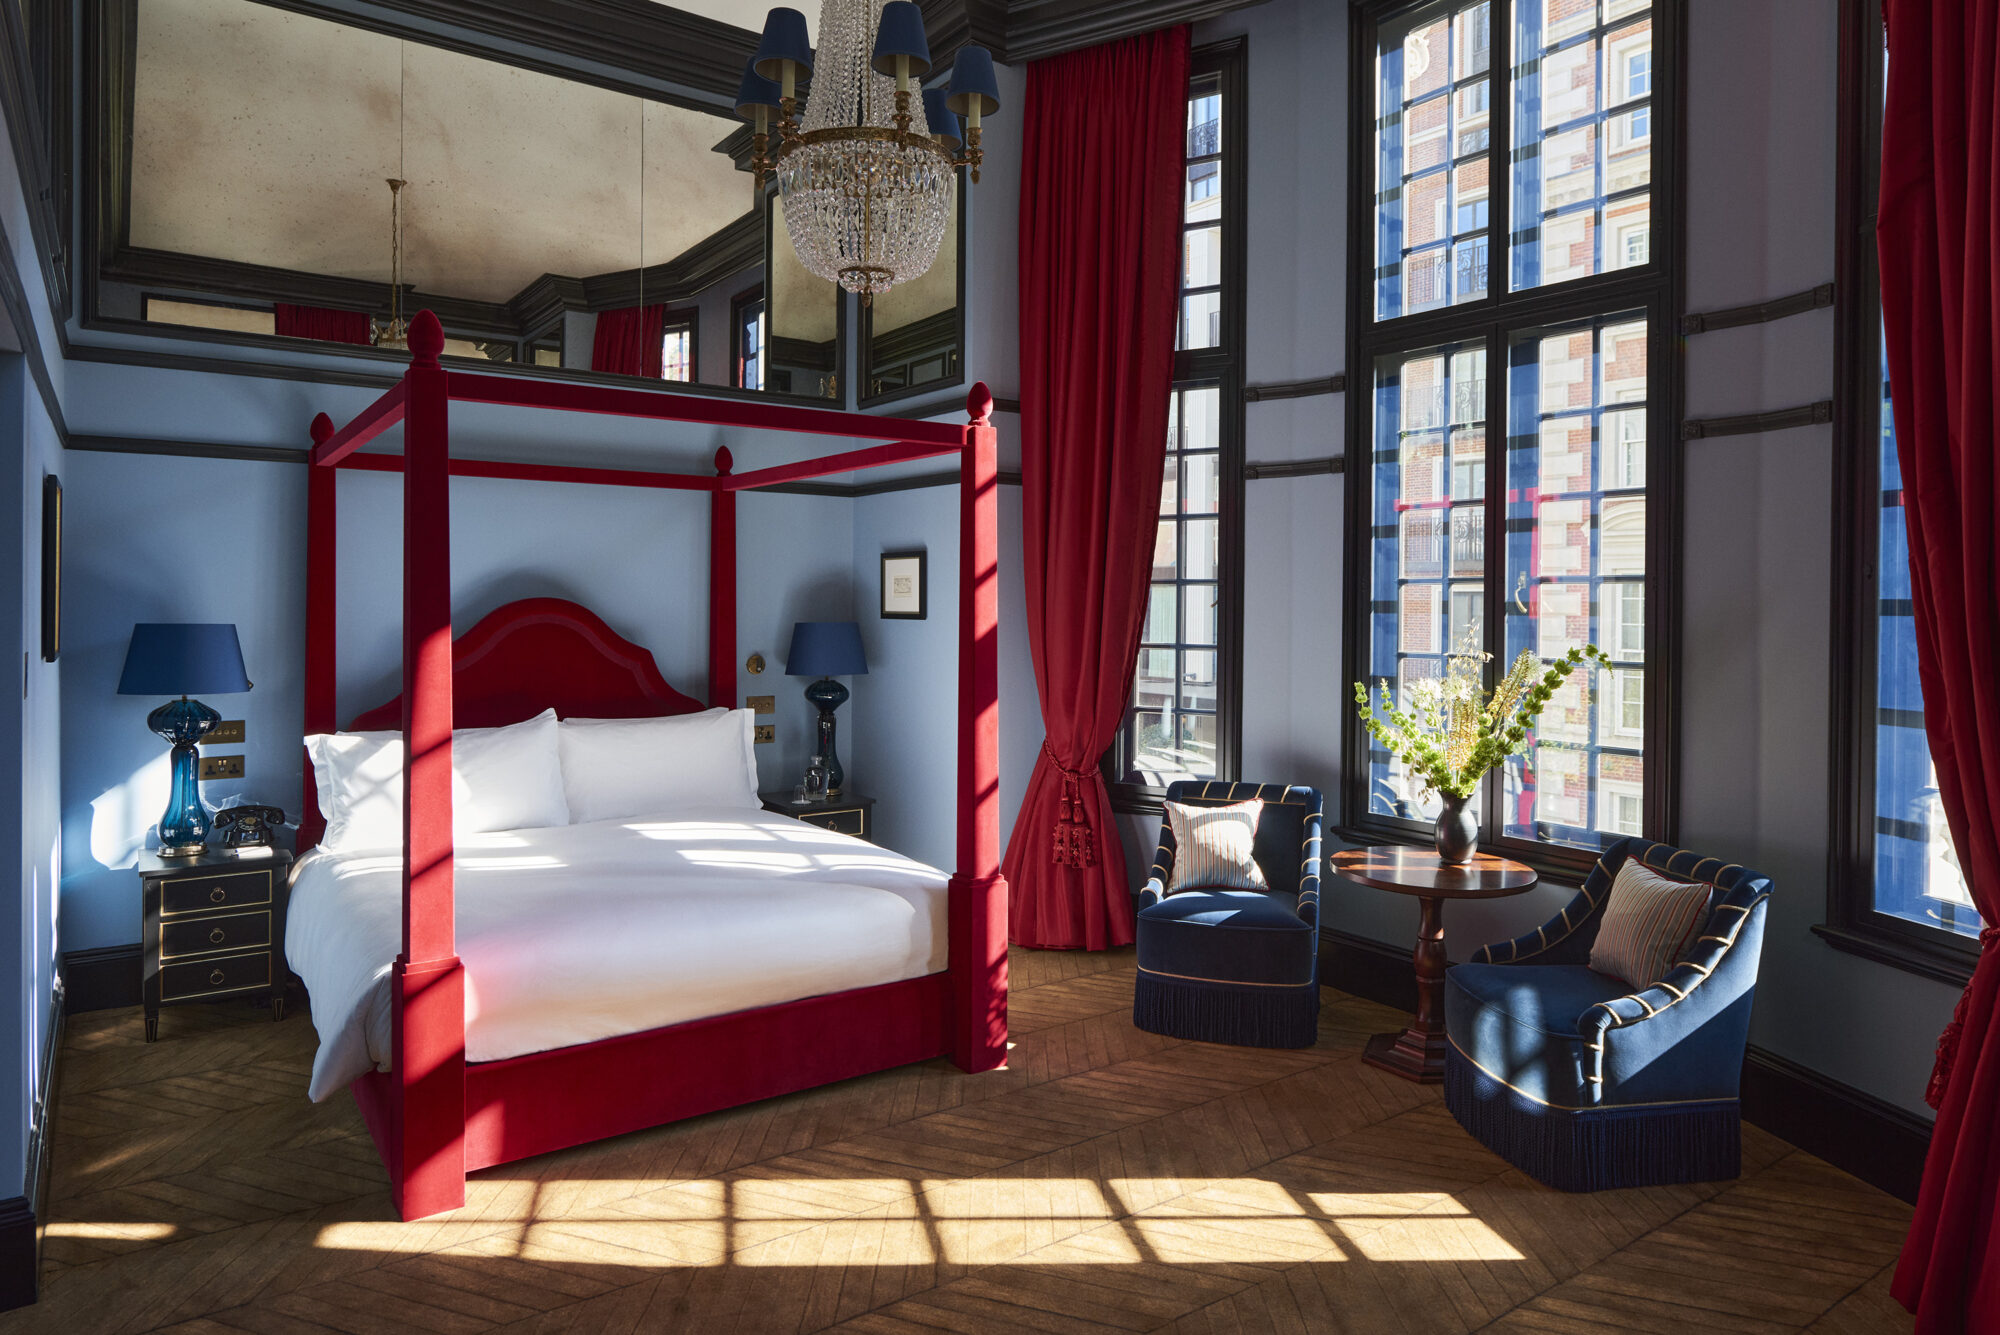 A room at The Twenty Two hotel in London